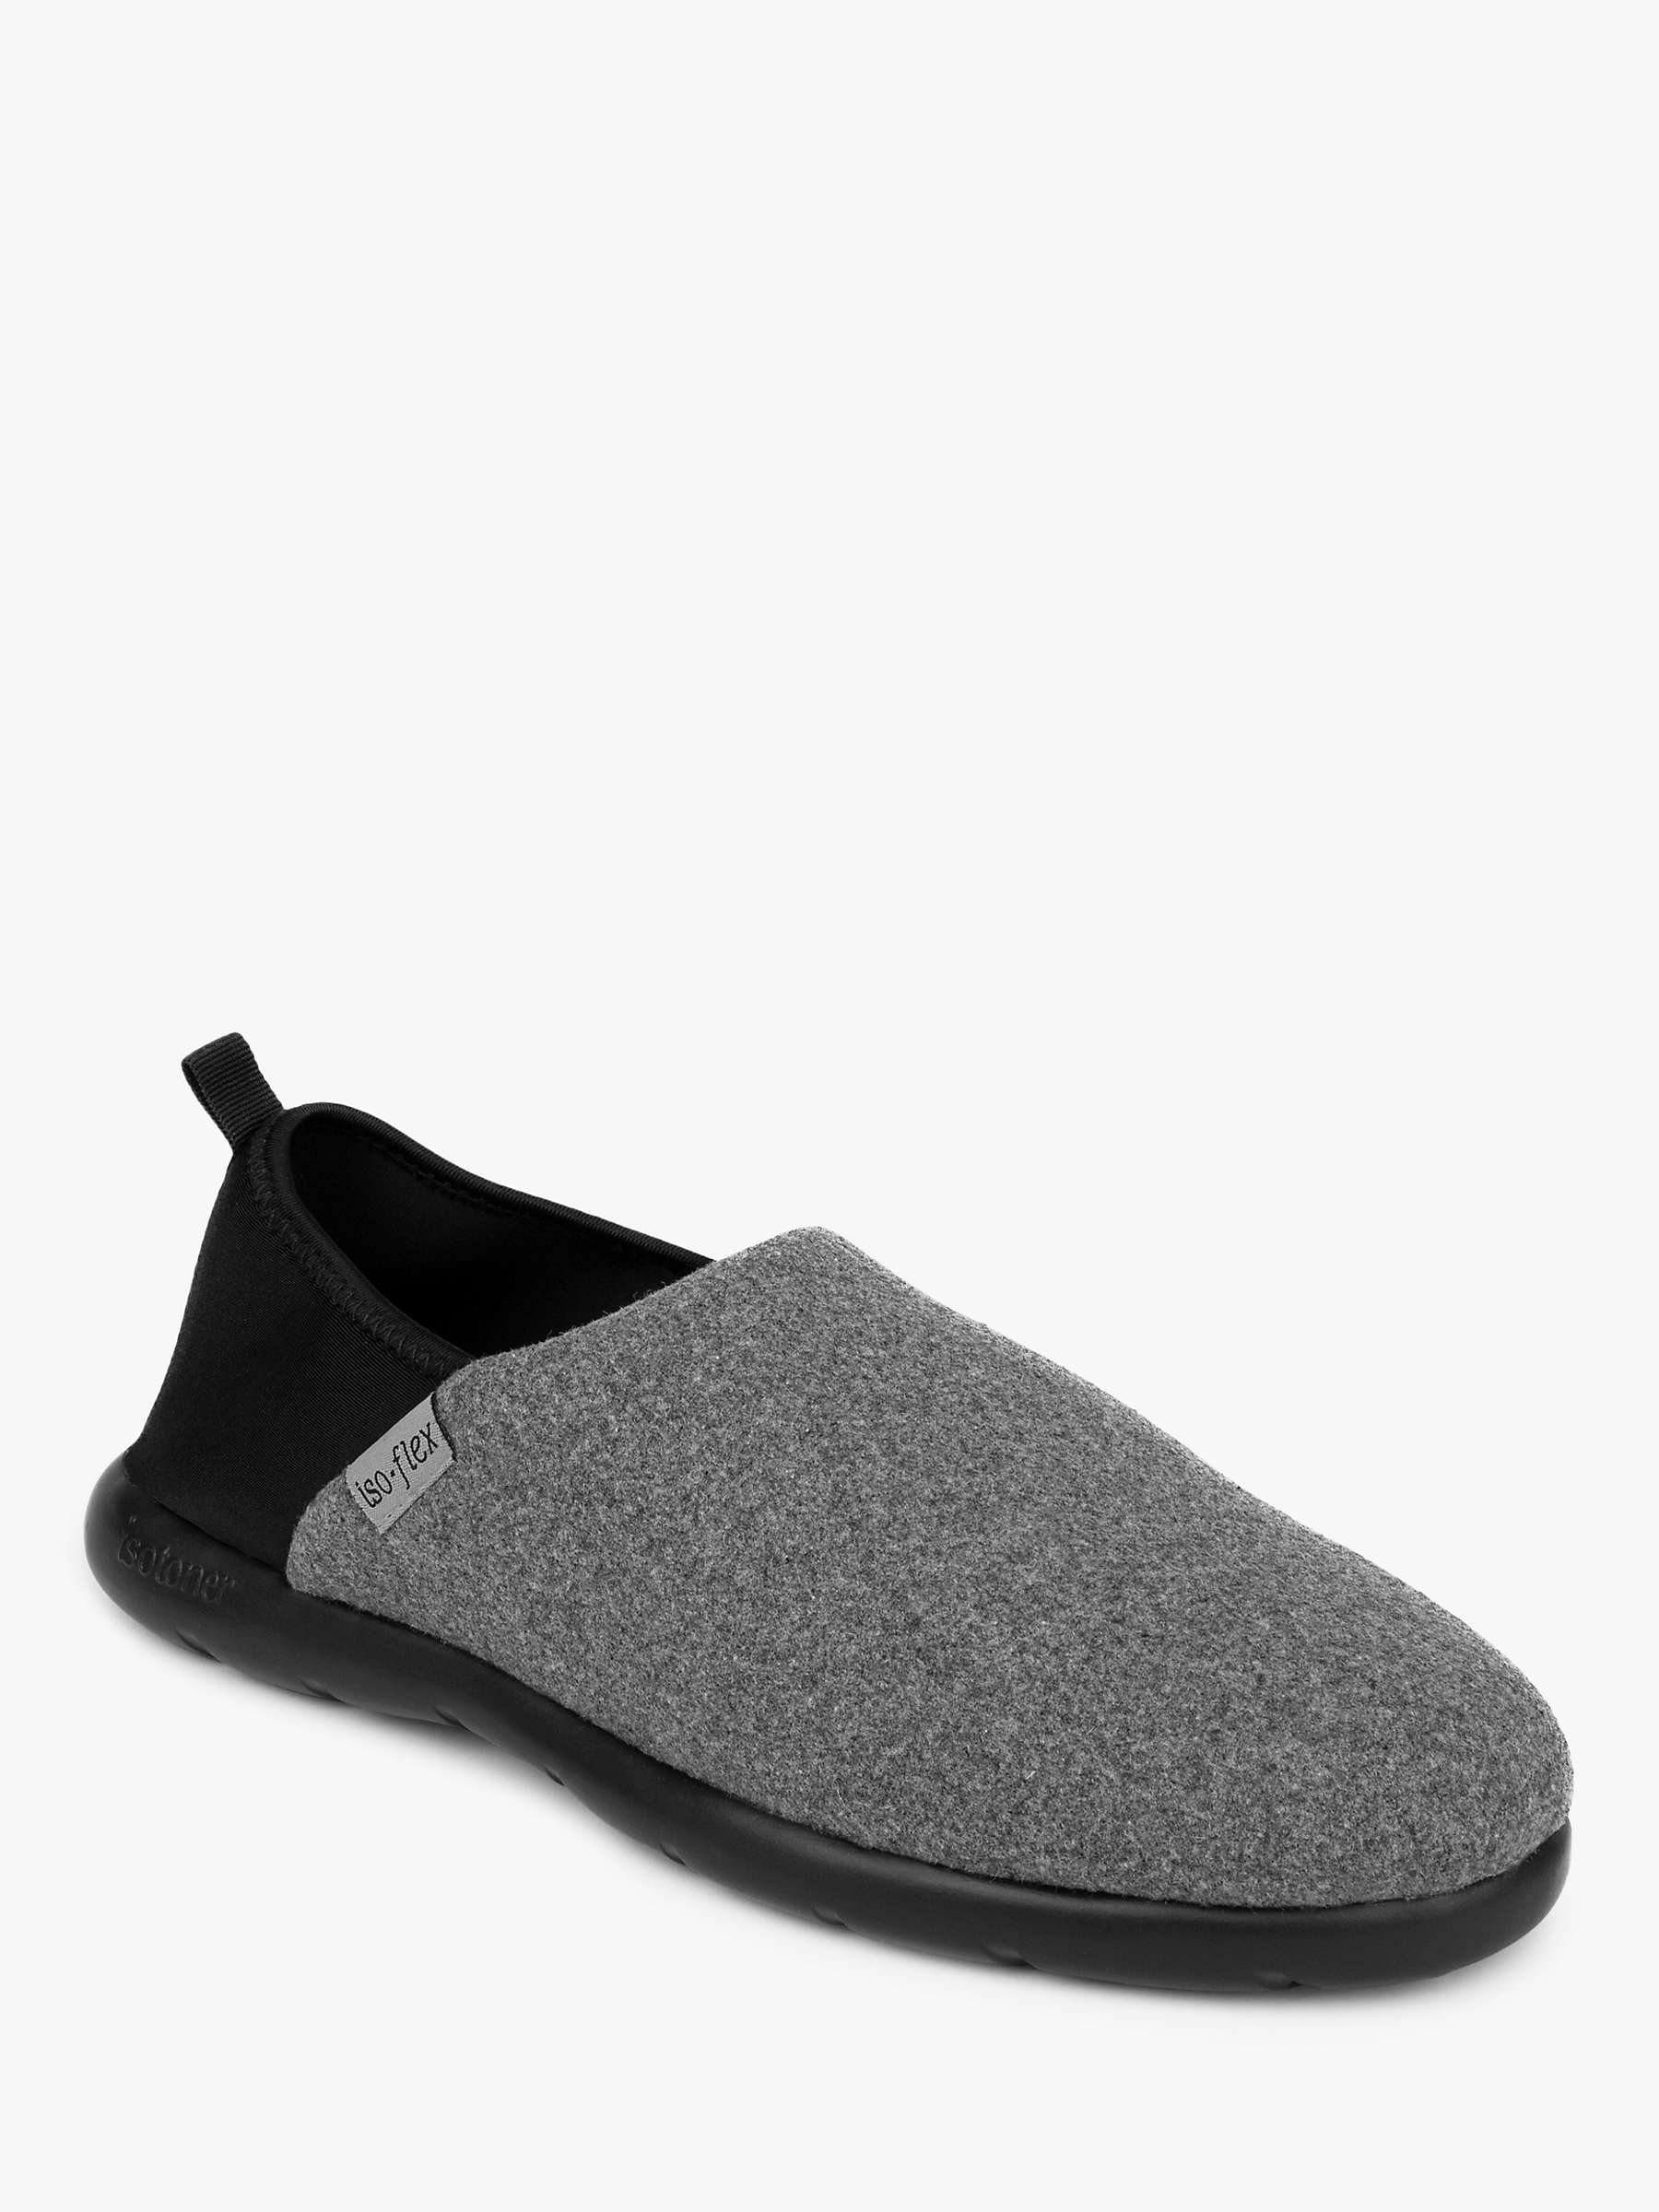 Buy totes Iso Flex Textured Colour Block Mule Slippers, Grey/Black Online at johnlewis.com